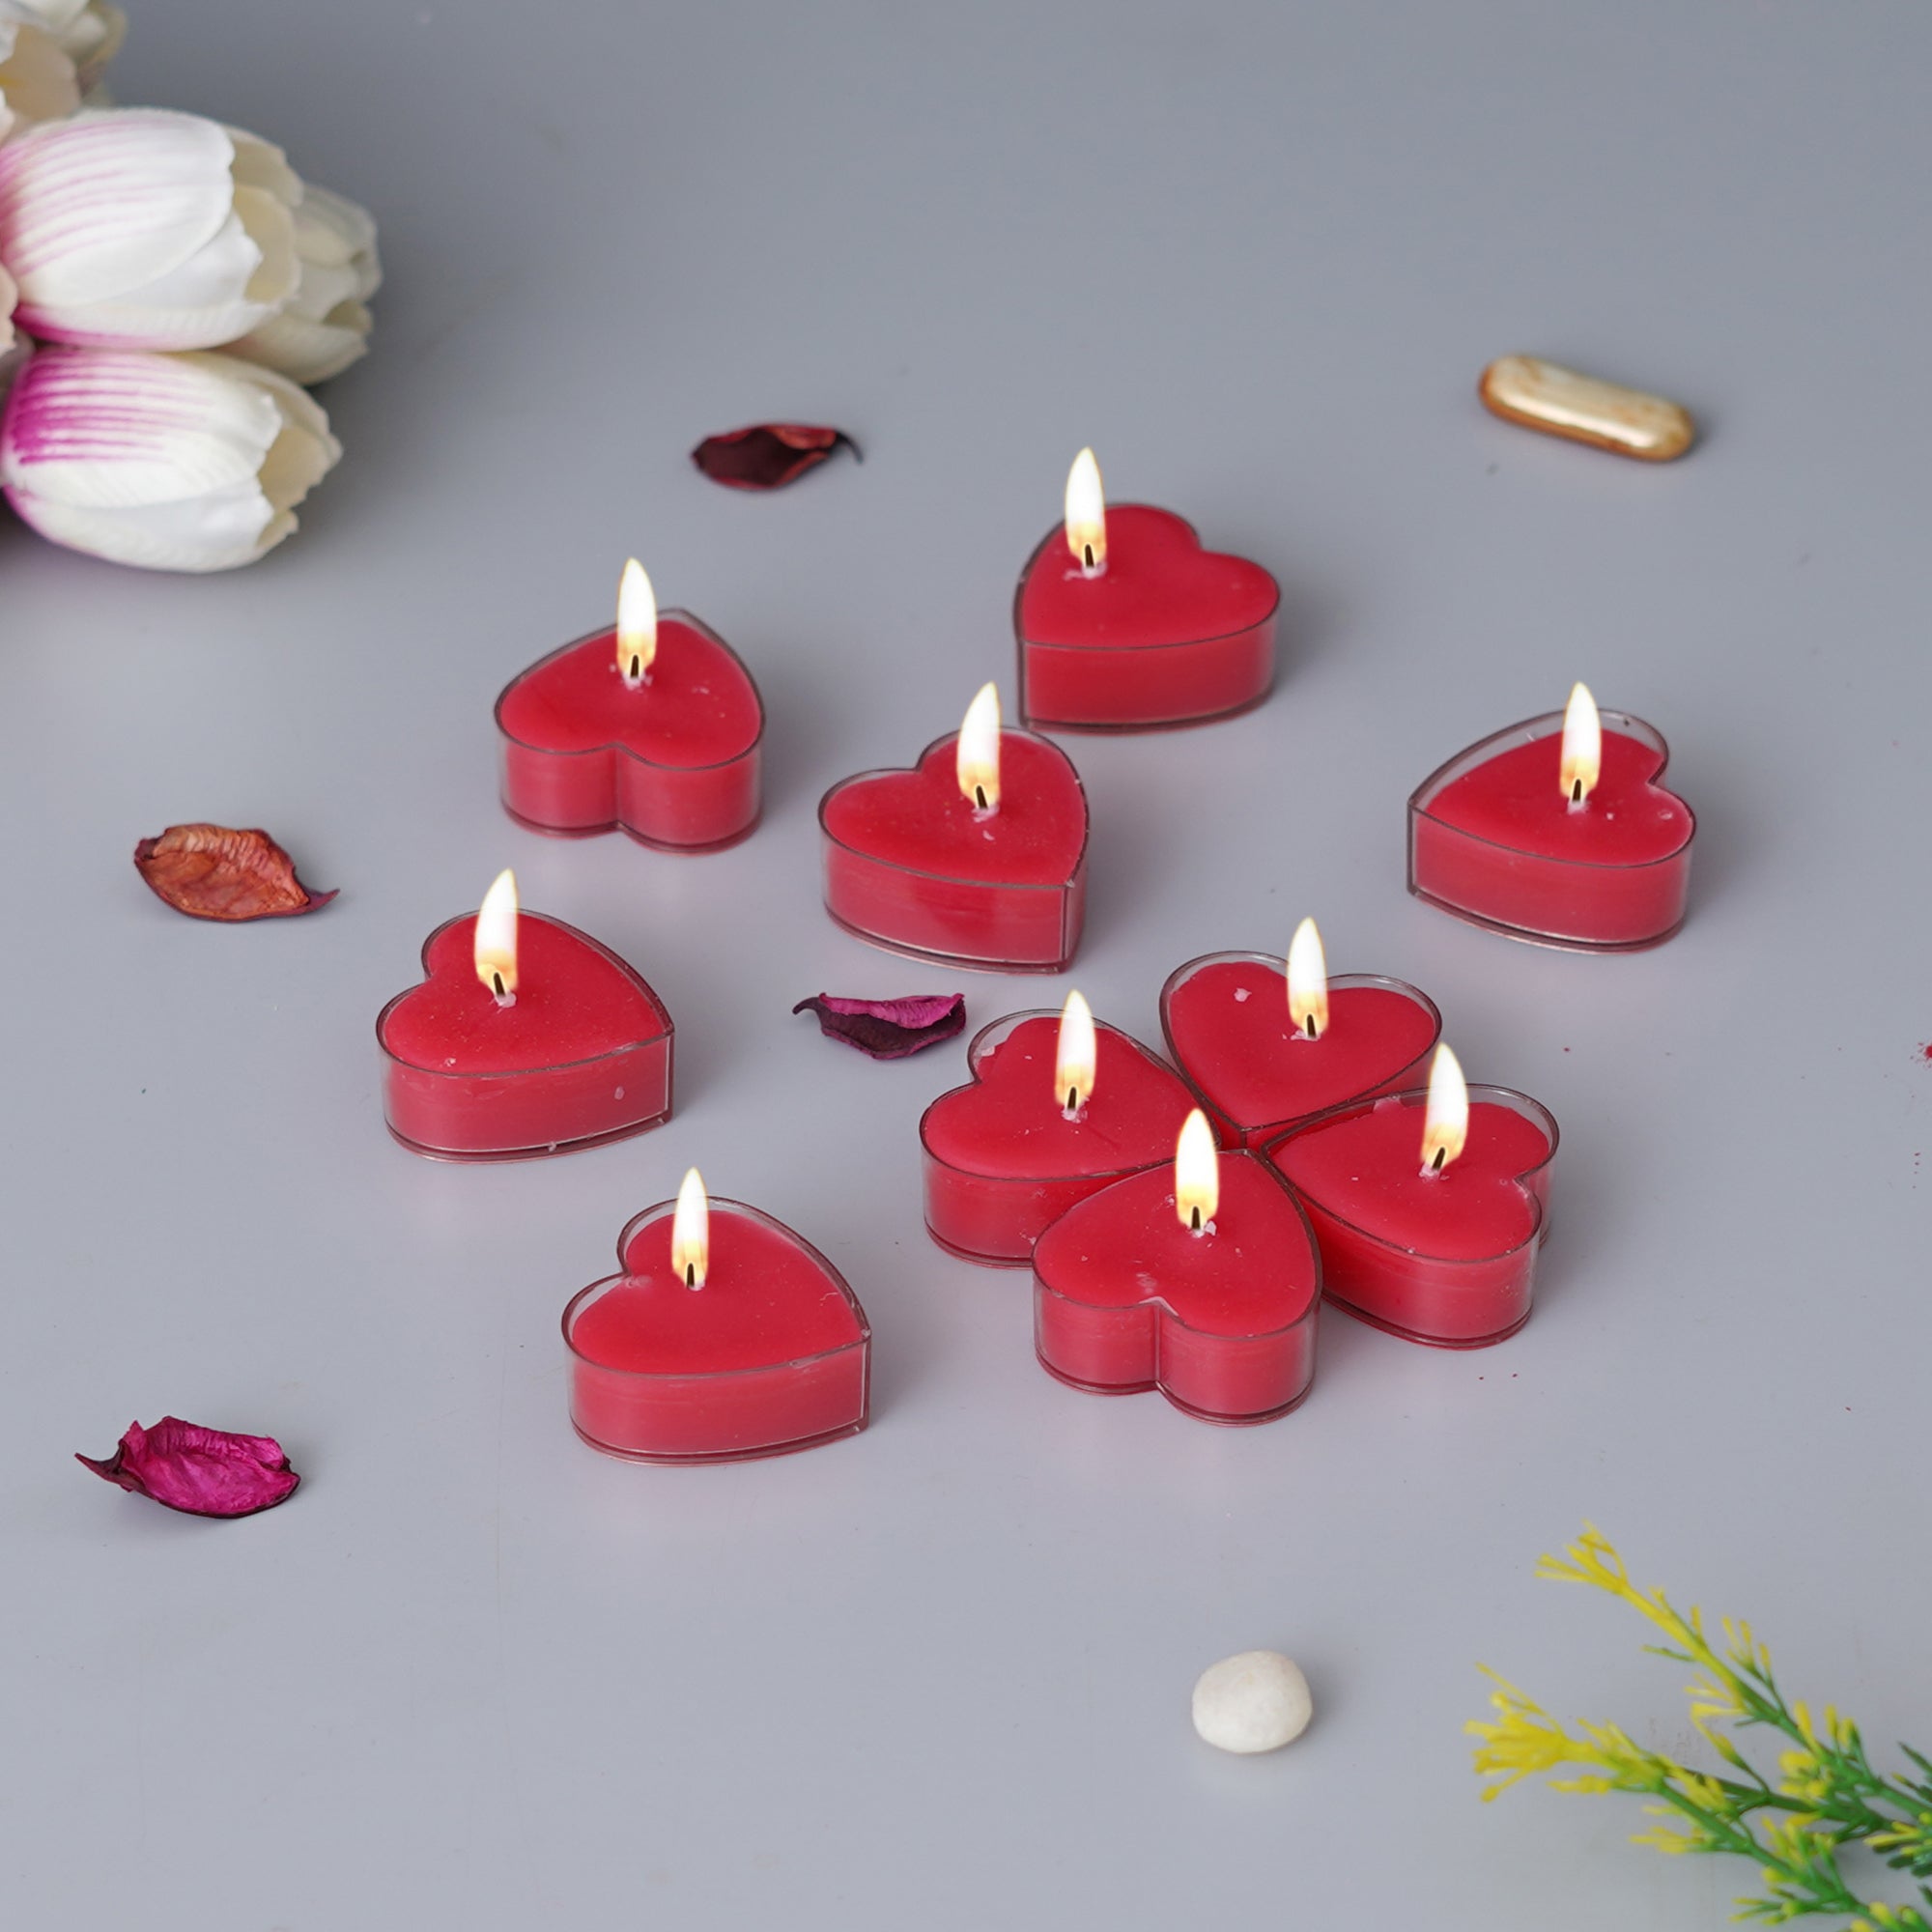 Set Of 20 Romantic Heart Shaped Rose Scented Tea Light Candles